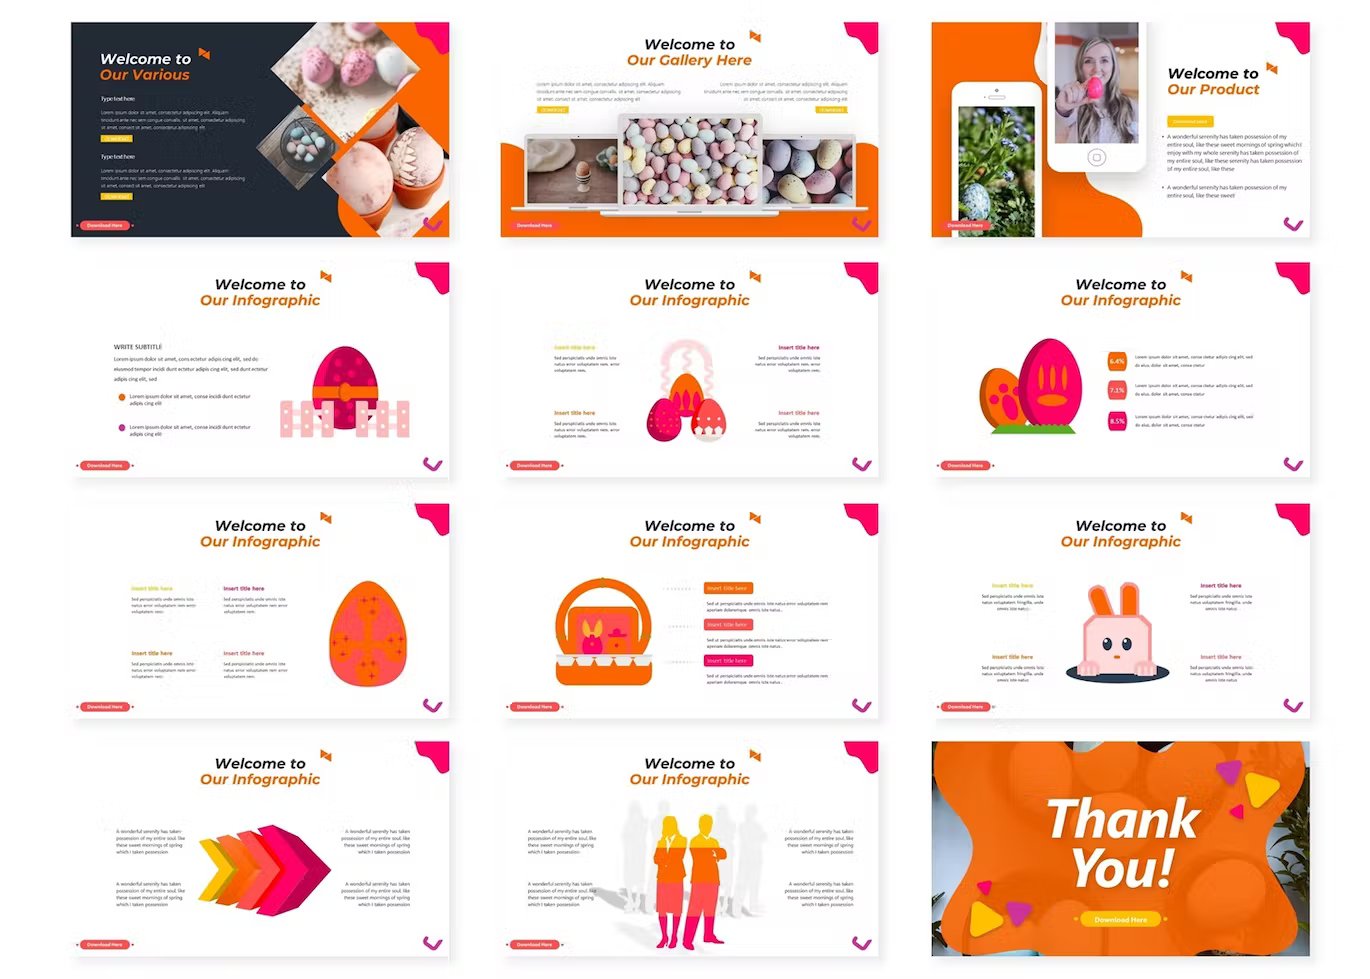 A set of 12 different the easter google slides templates in orange, white, dark gray, yellow and pink on a white background.